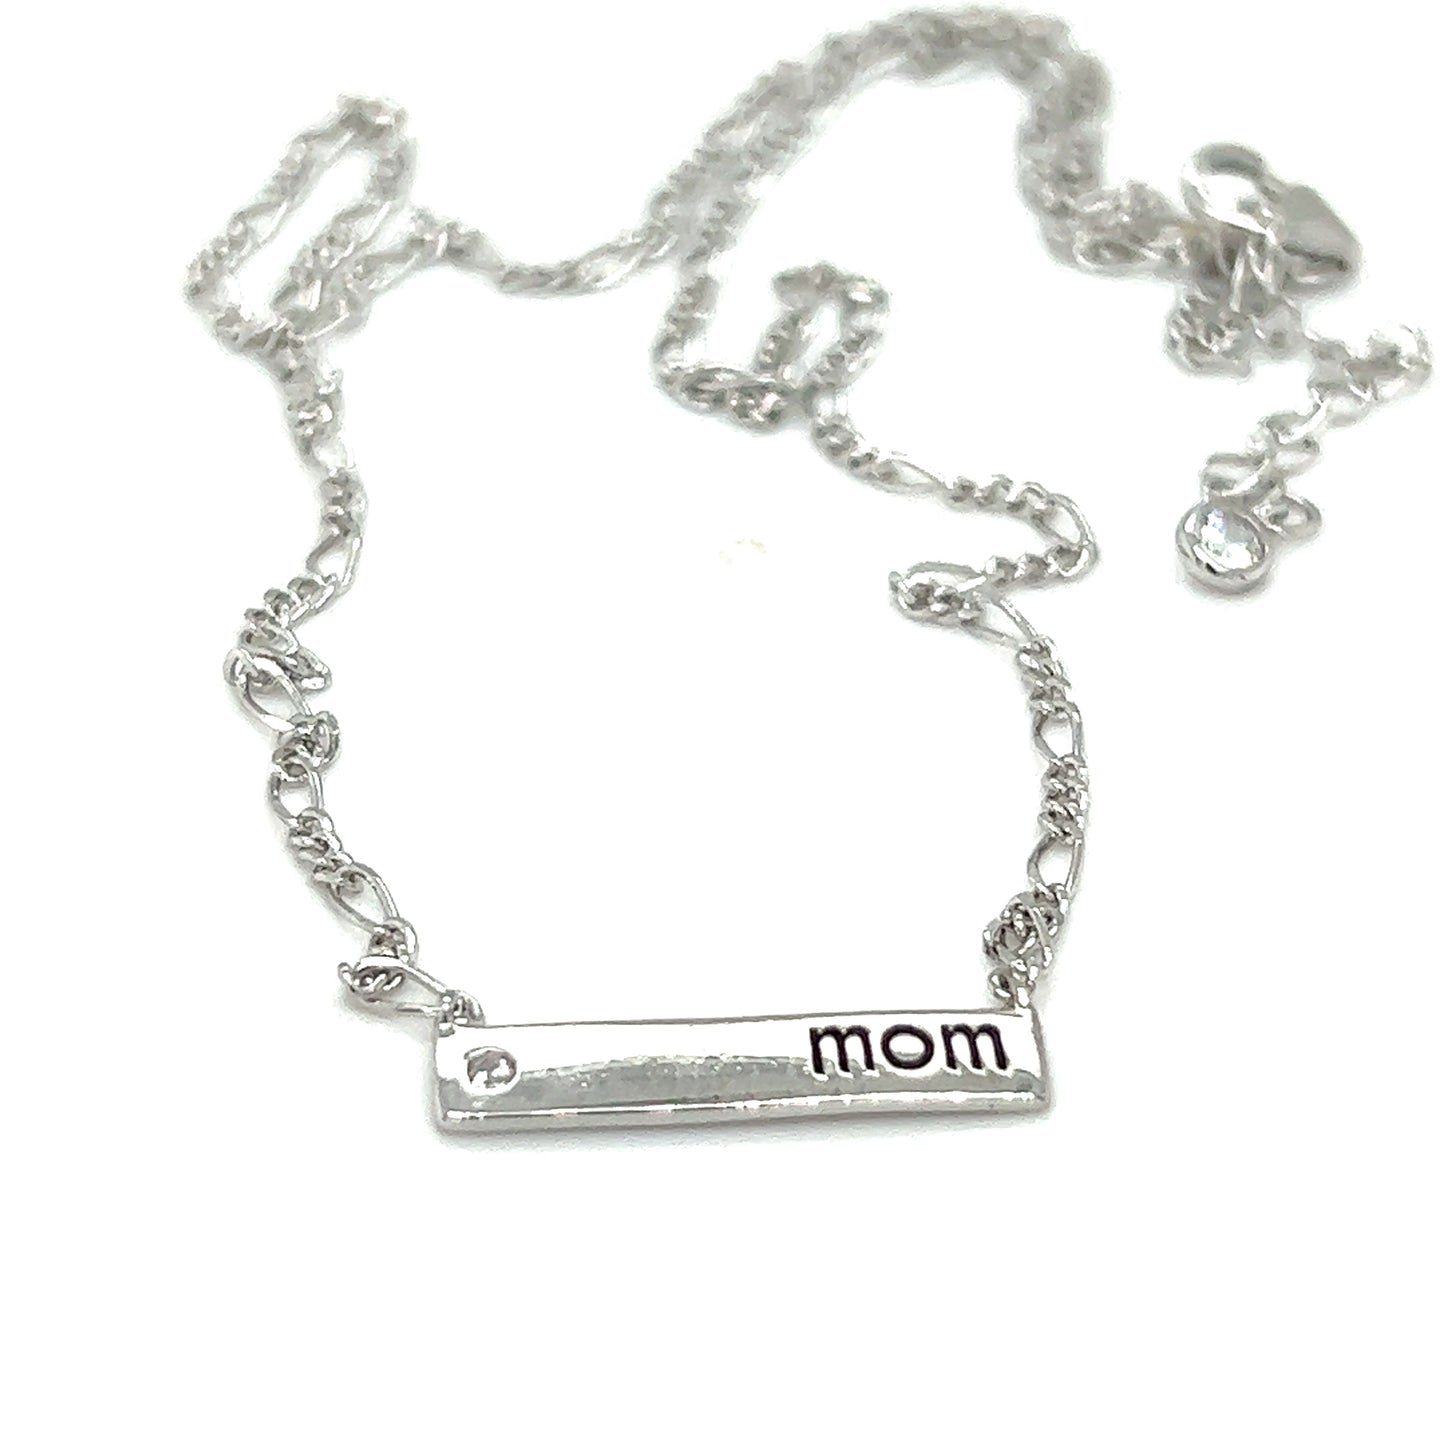 A gratitude Delicate Mom Plate Necklace for mom, adorned with the word "mom" from Super Silver.